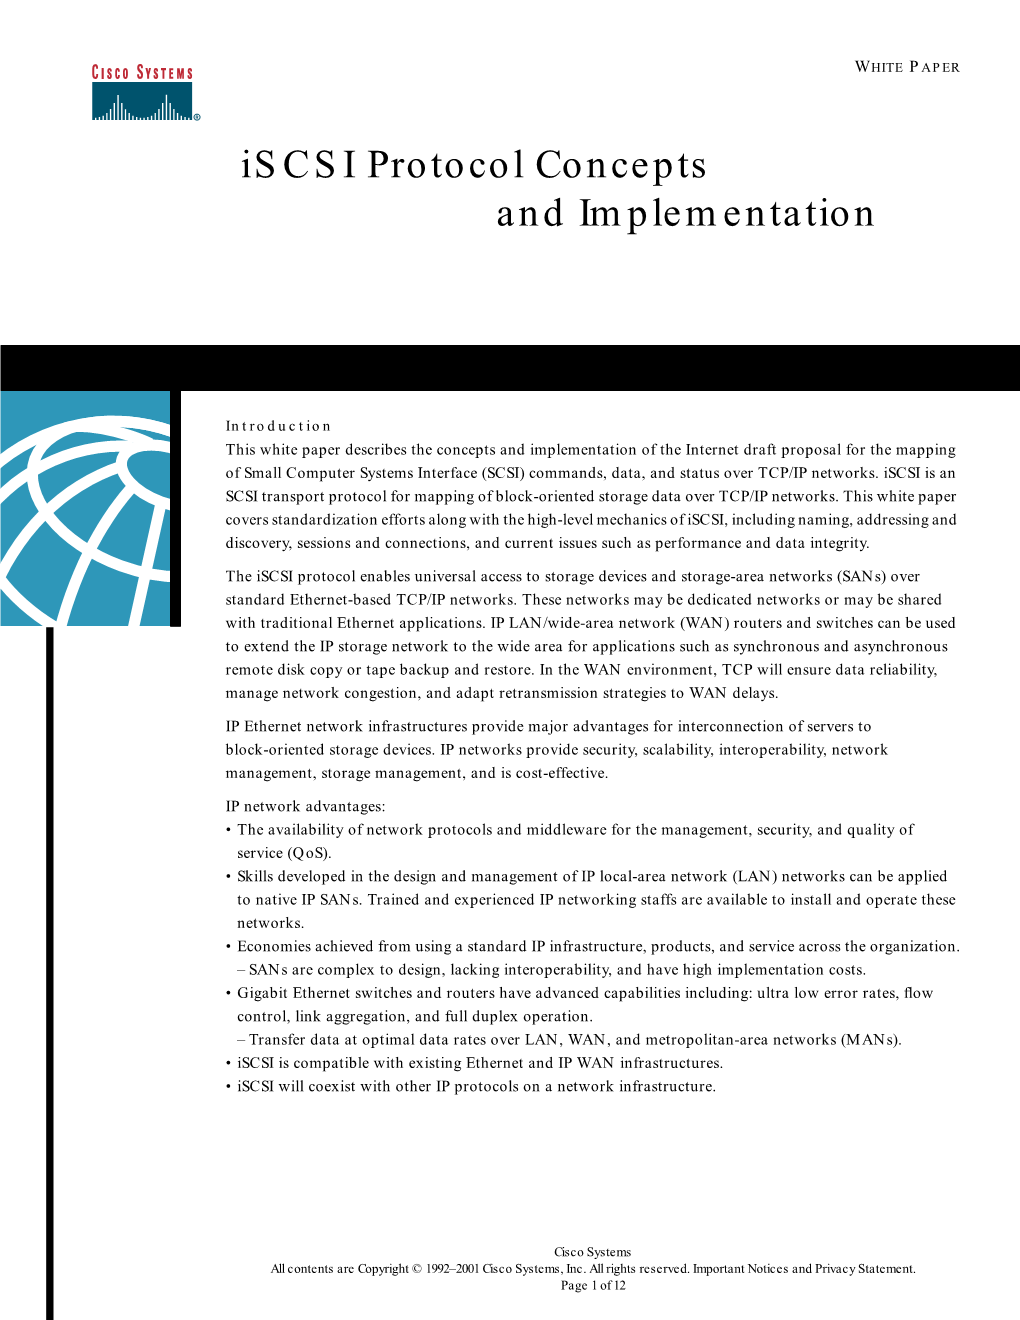 Iscsi Protocol Concepts and Implementation